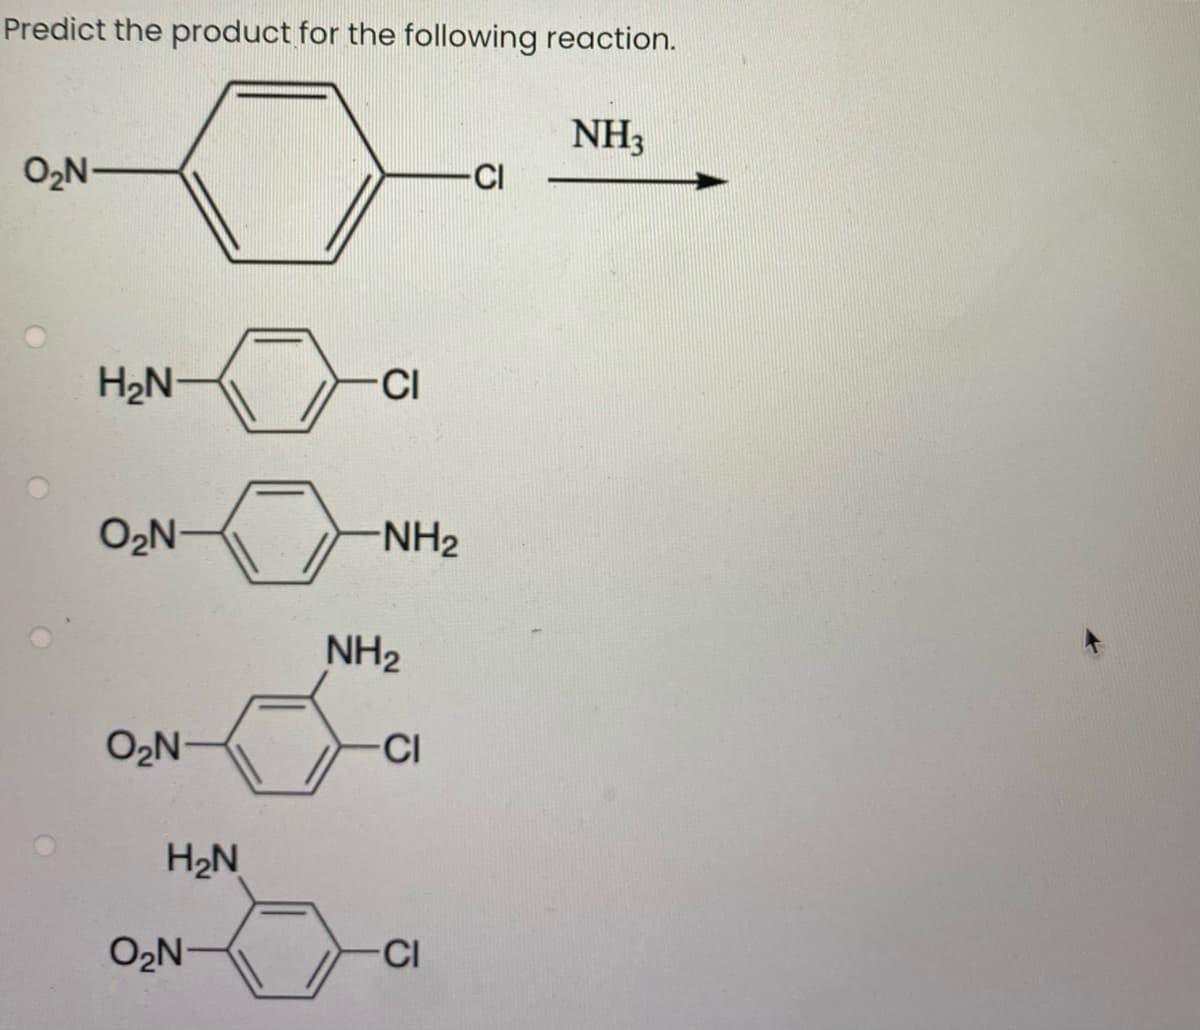 Predict the product for the following reaction.
NH3
ON-
-CI
H2N-
CI
O2N-
-NH2
NH2
O2N
CI
H2N
O2N-
-CI
